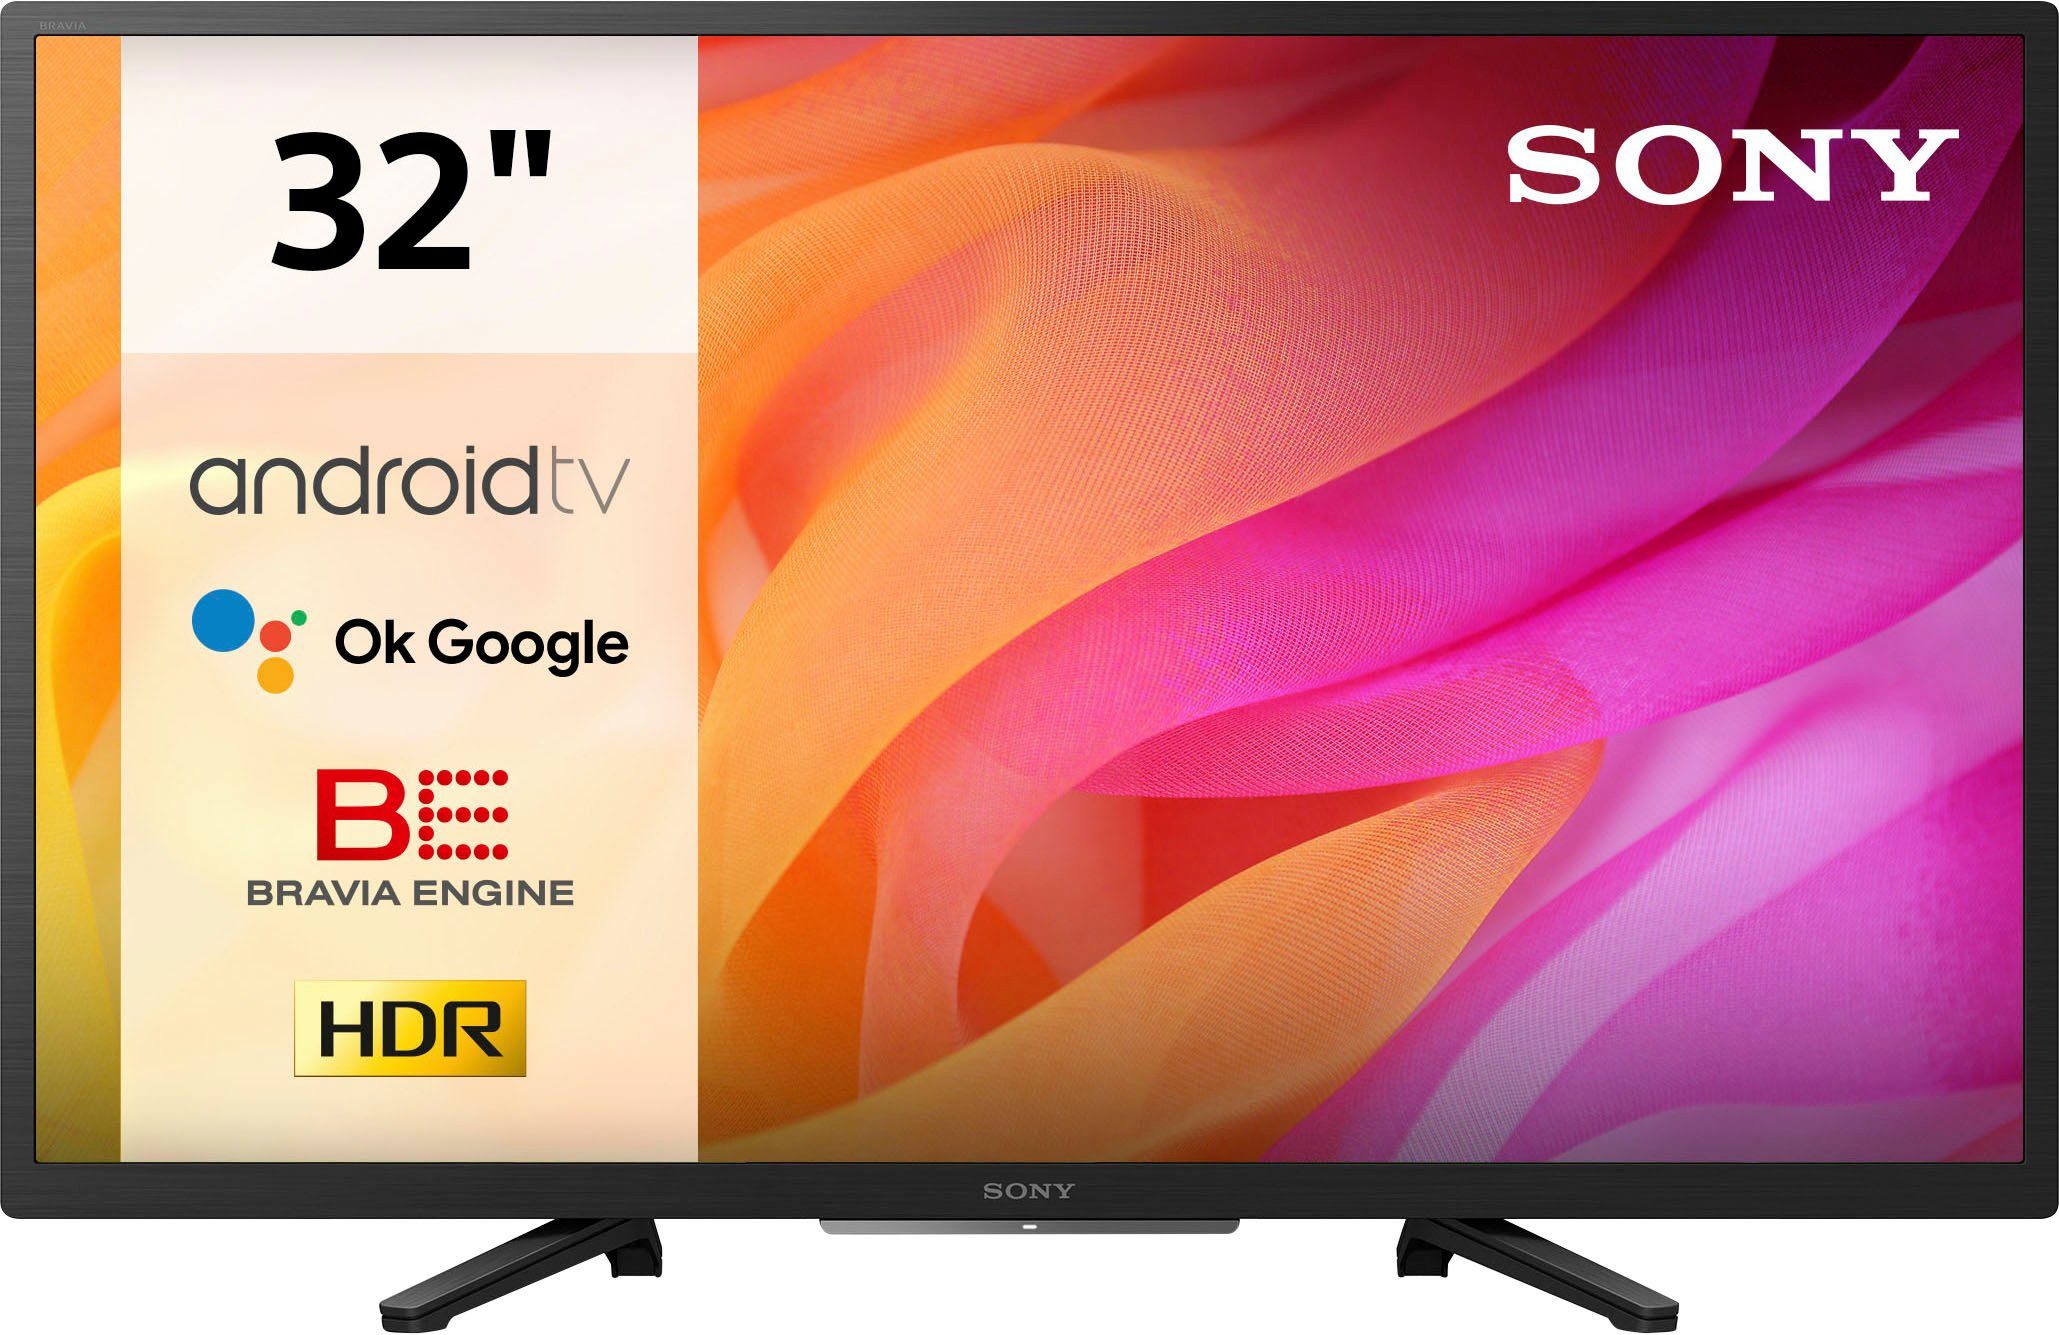 Sony KD-32W800/1 LCD-LED Fernseher (80 cm/32 Zoll, WXGA, Android TV, BRAVIA, HD Heady, Smart TV, Triple Tuner, HDR) | alle Fernseher